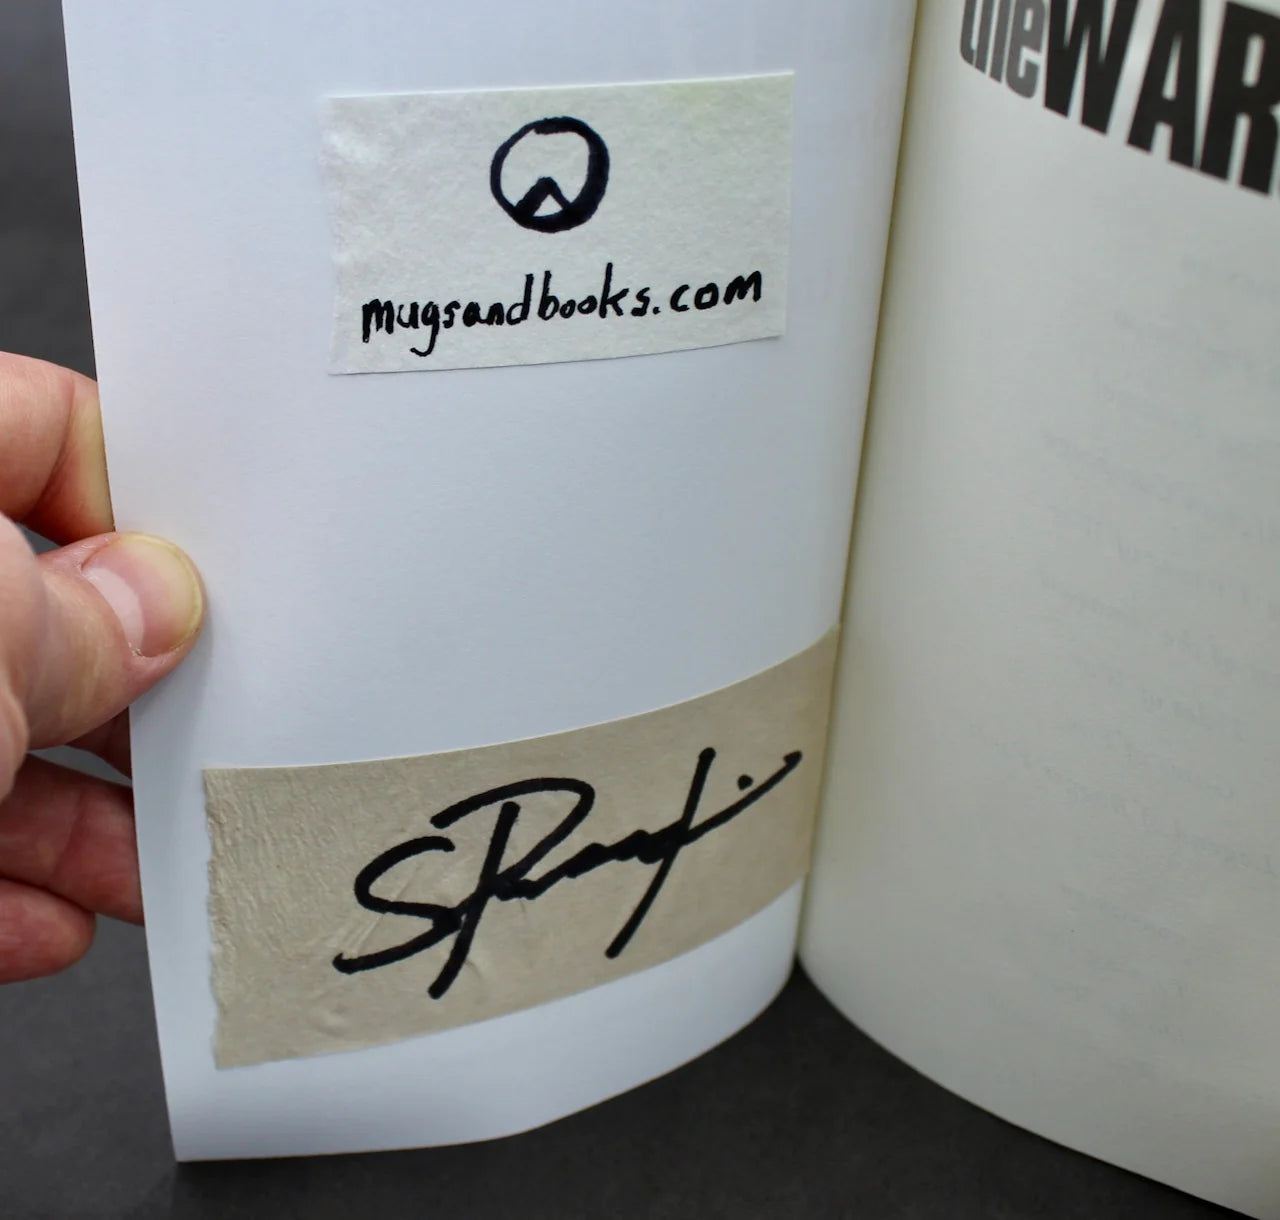 One Bullet Flower Mug and Autographed Book, "The War of Art" by Steven Pressfield (SK7804)